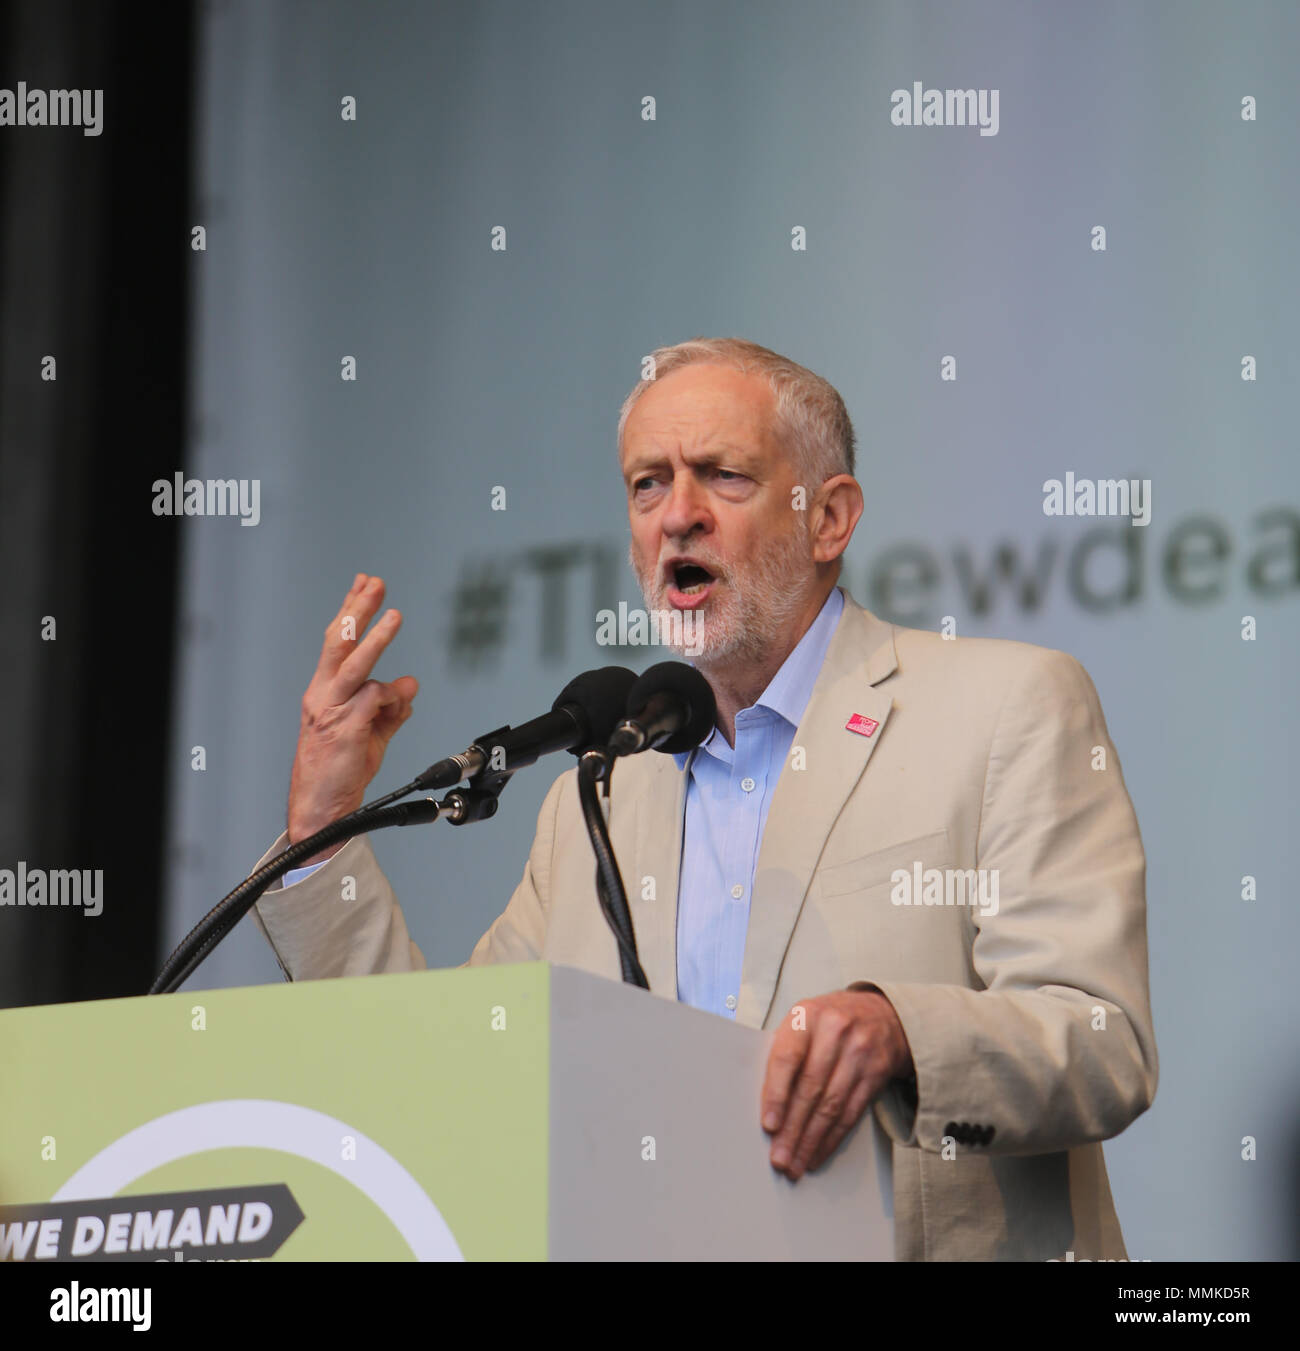 London UK 12 May 2018  Jeremy Corbyn Leader of the Labour Party and Leader of the Opposition since 2015. He has been the Member of Parliament for Islington North since 1983 speaking at the Trades Union Congress (the umbrella organisation of Trade Unions) who called a national demonstration under the slogan of 'A New Deal for Working People. Demanding  a real Living Wage for all workers, collective bargaining and union rights and an end to the 'gig-economy' .@Paul Quezada-Neiman/Alamy Live News Stock Photo